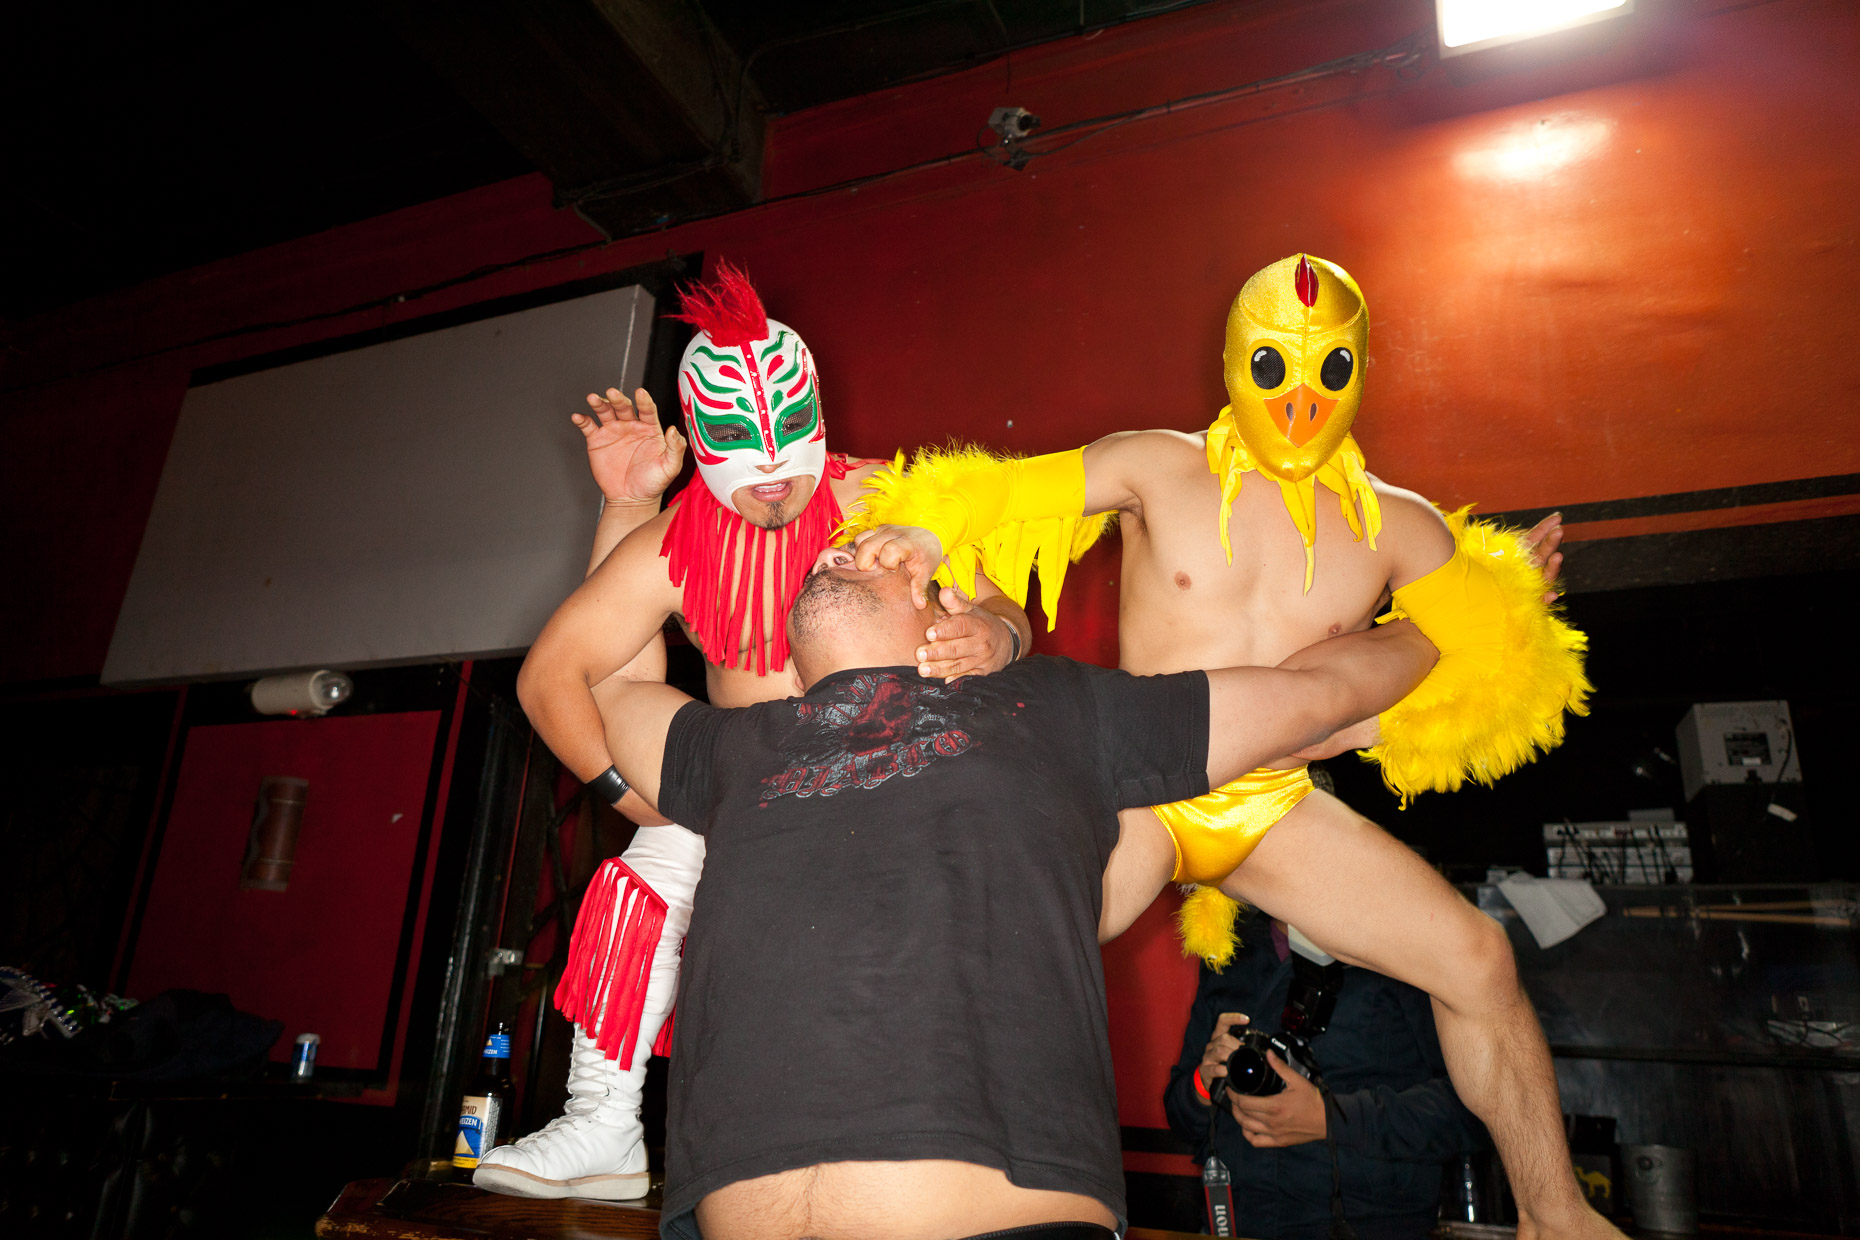 Lucha Vavoom Mexican wrestling and burlesque show in Los Angeles by David Zaitz